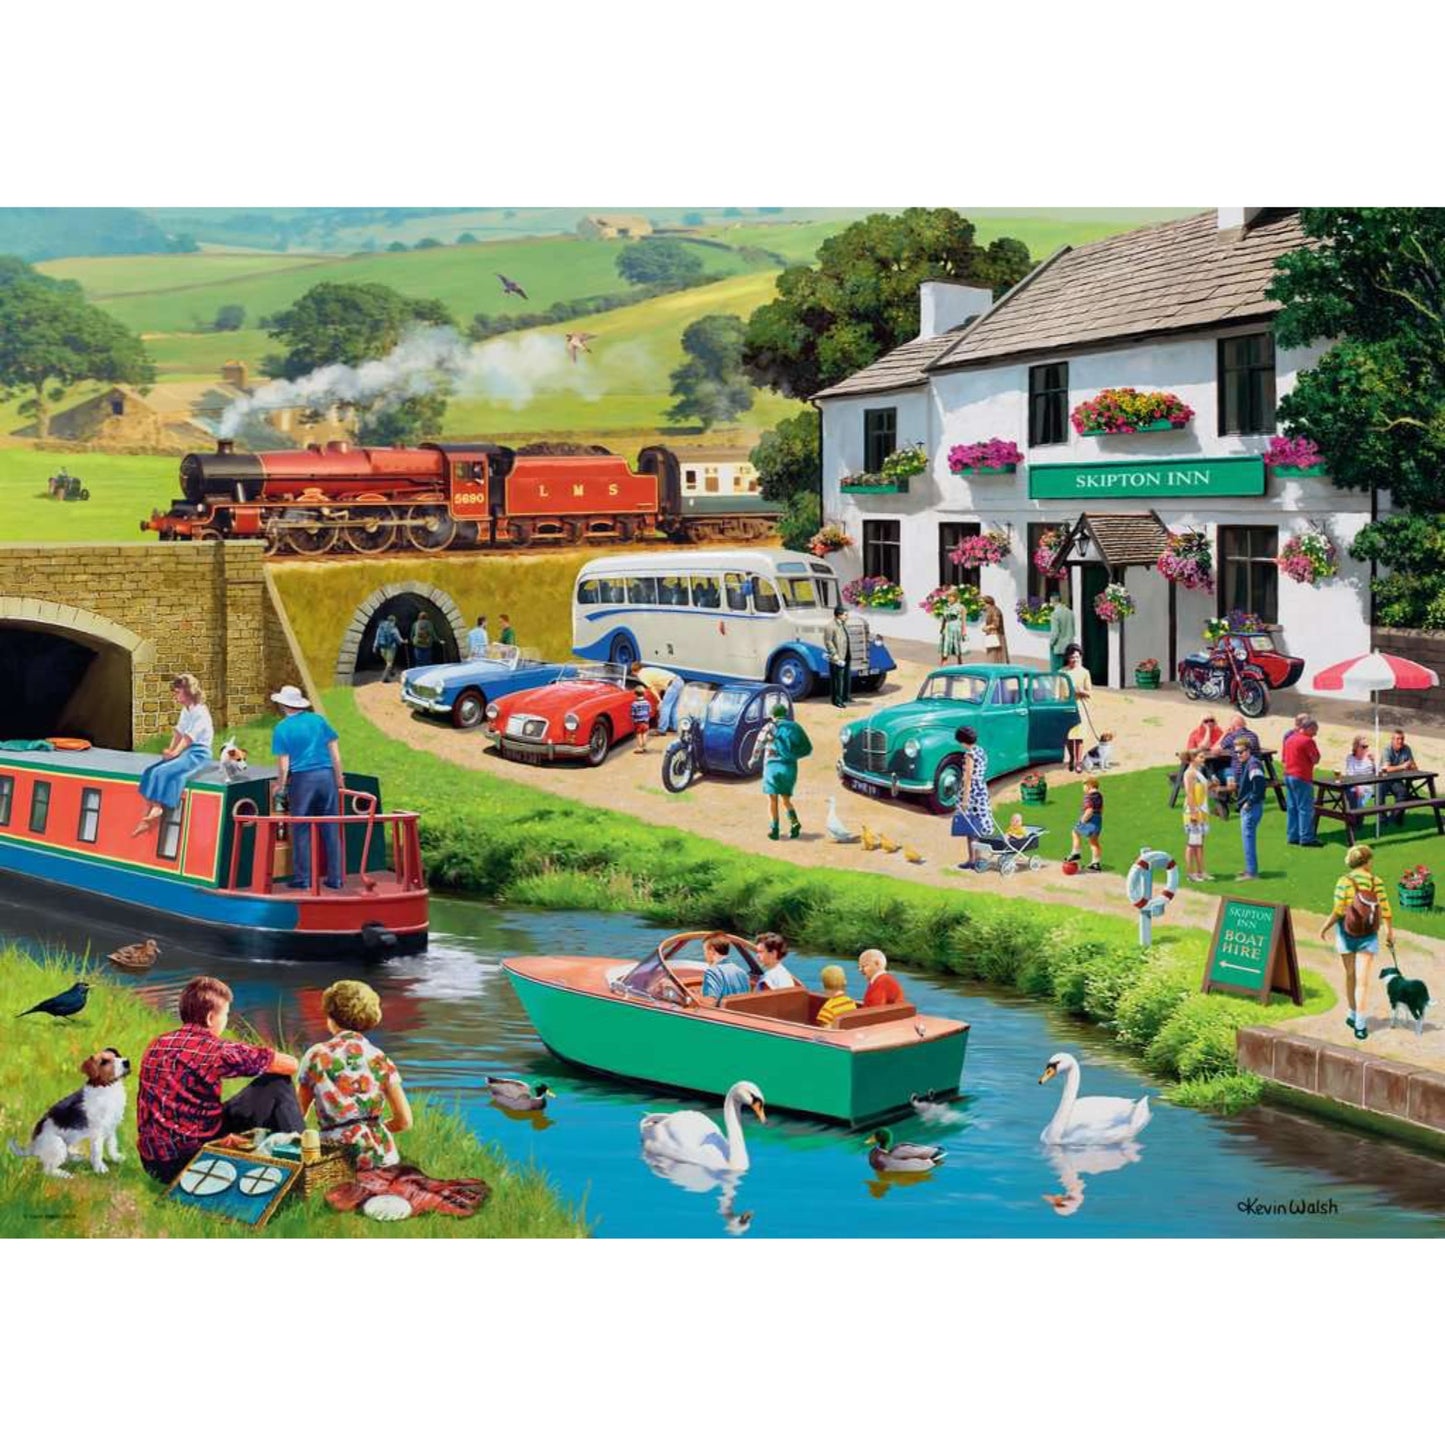 Leisure Days, Exploring the Yorkshire Dales Jigsaw Puzzle 1000 Piece - The Great Yorkshire Shop